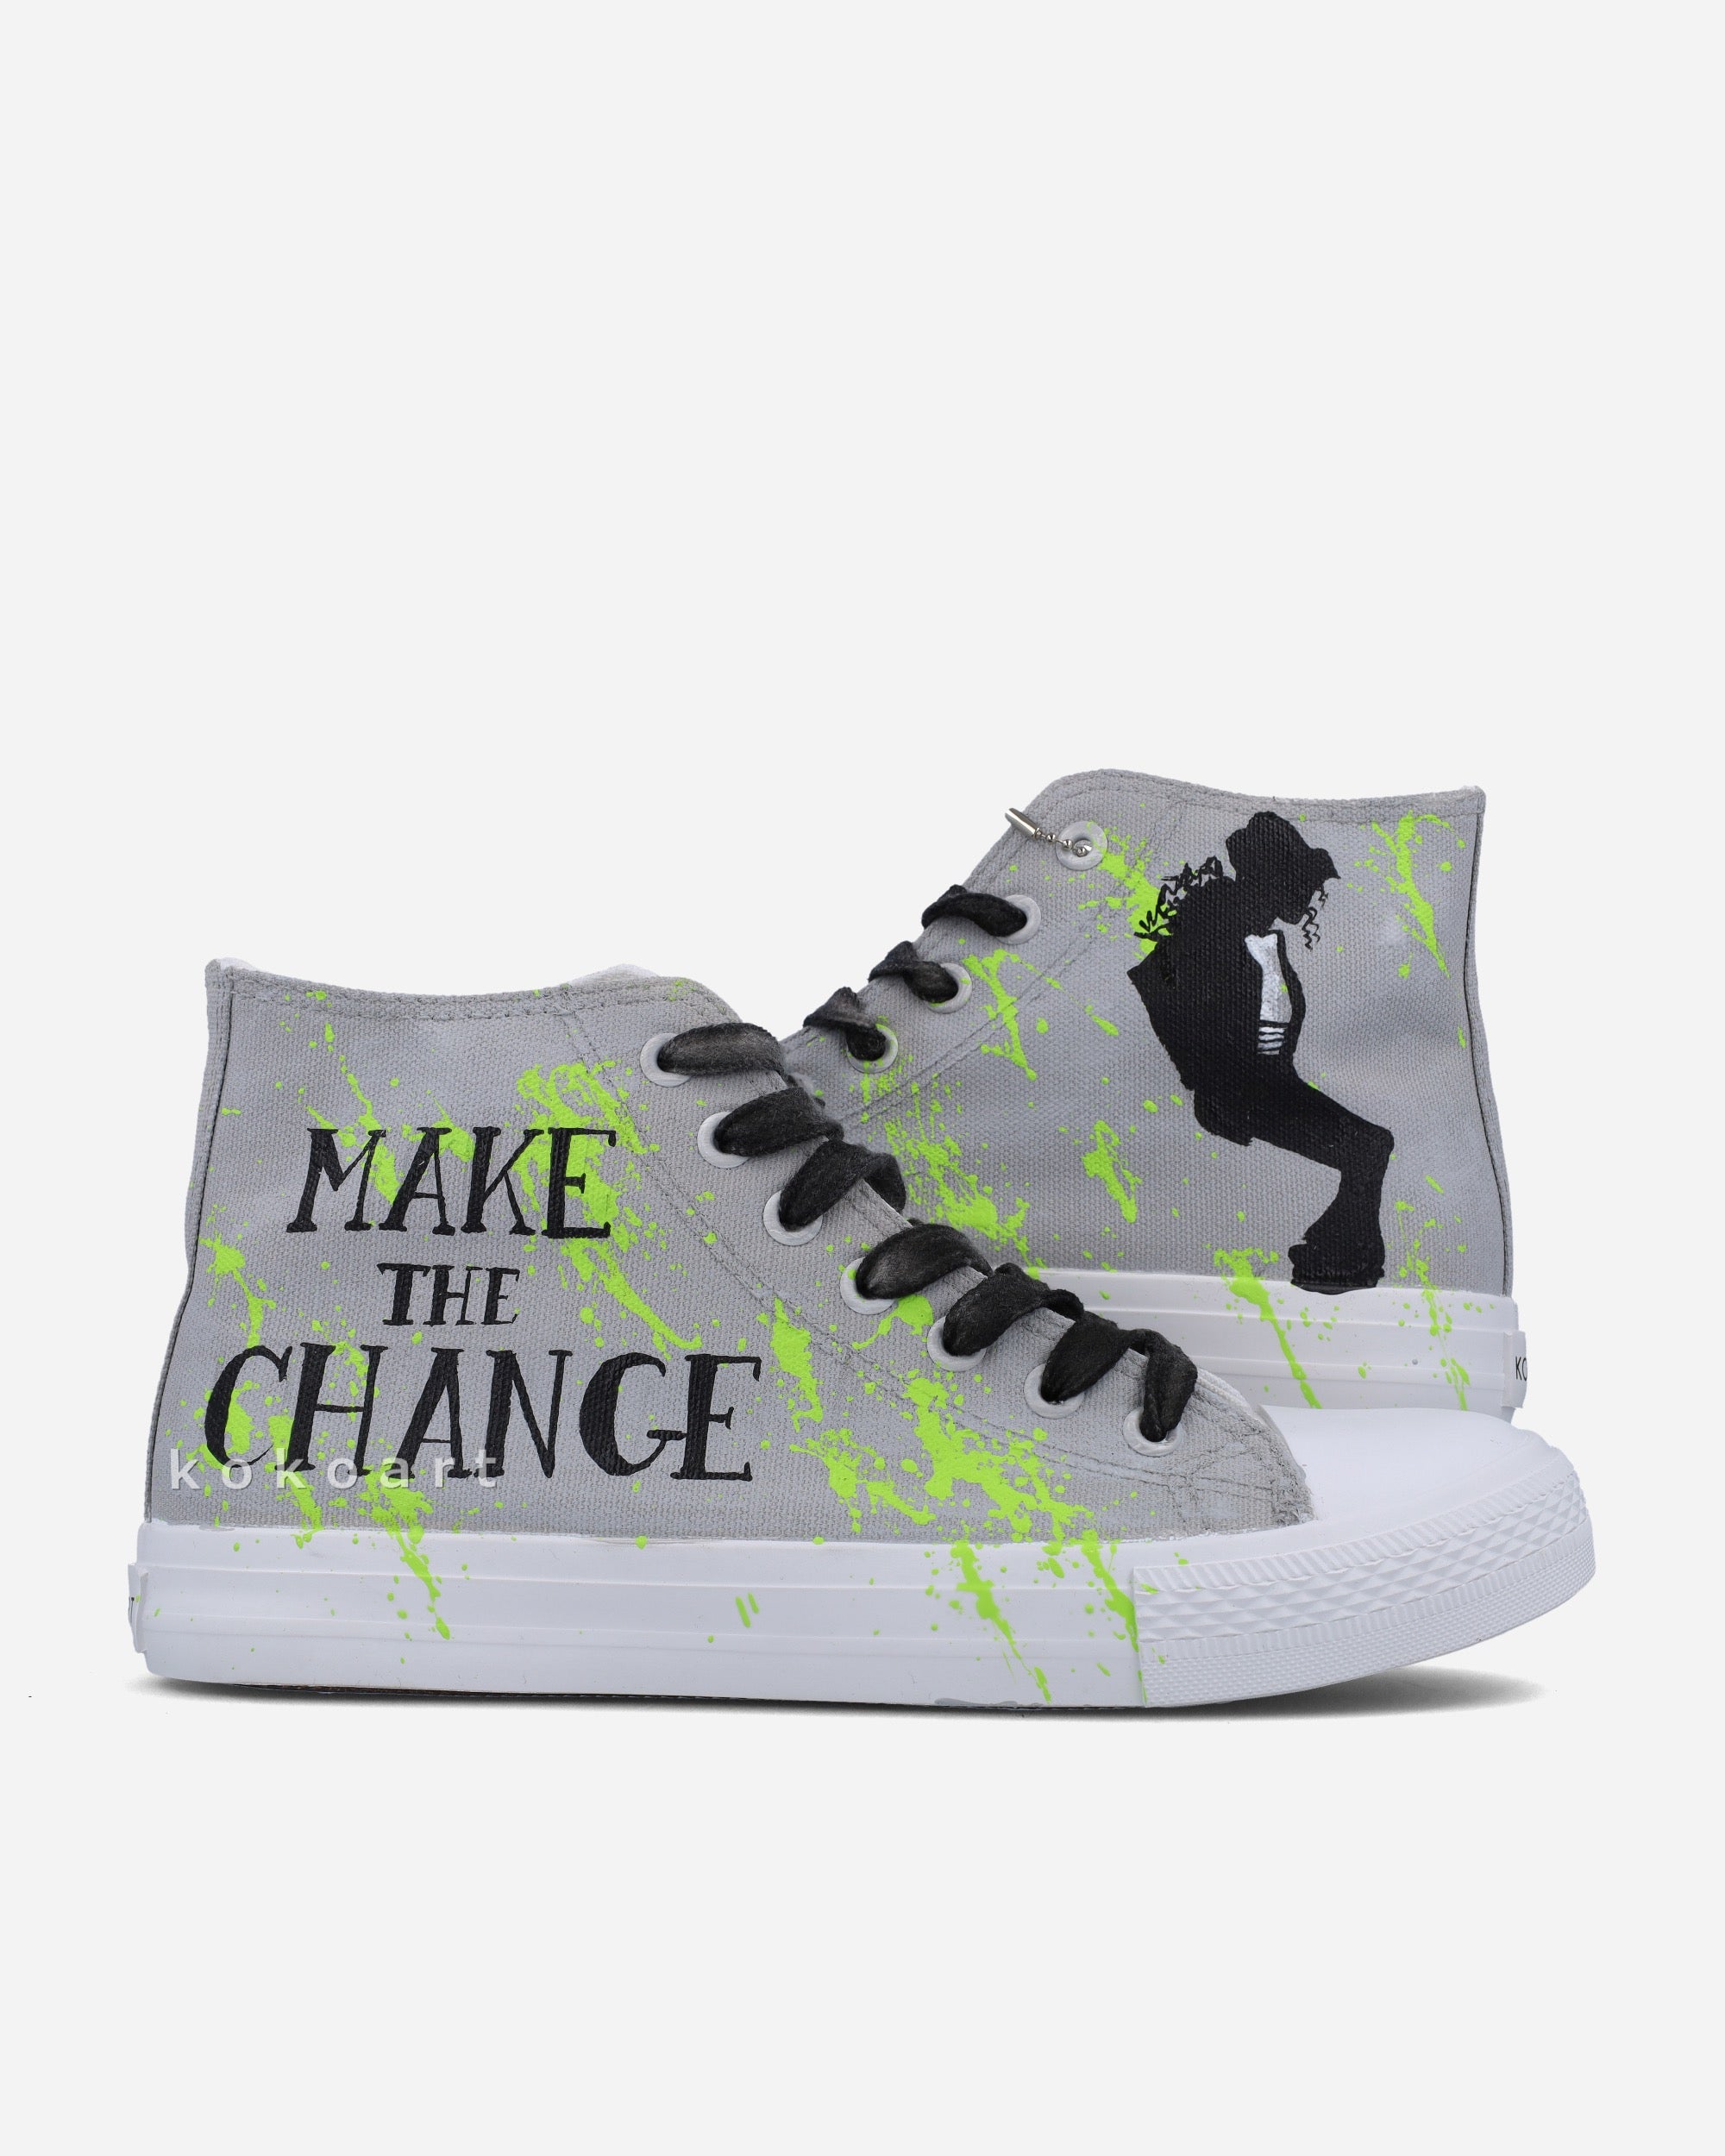 Make the Change Hand Painted Shoes